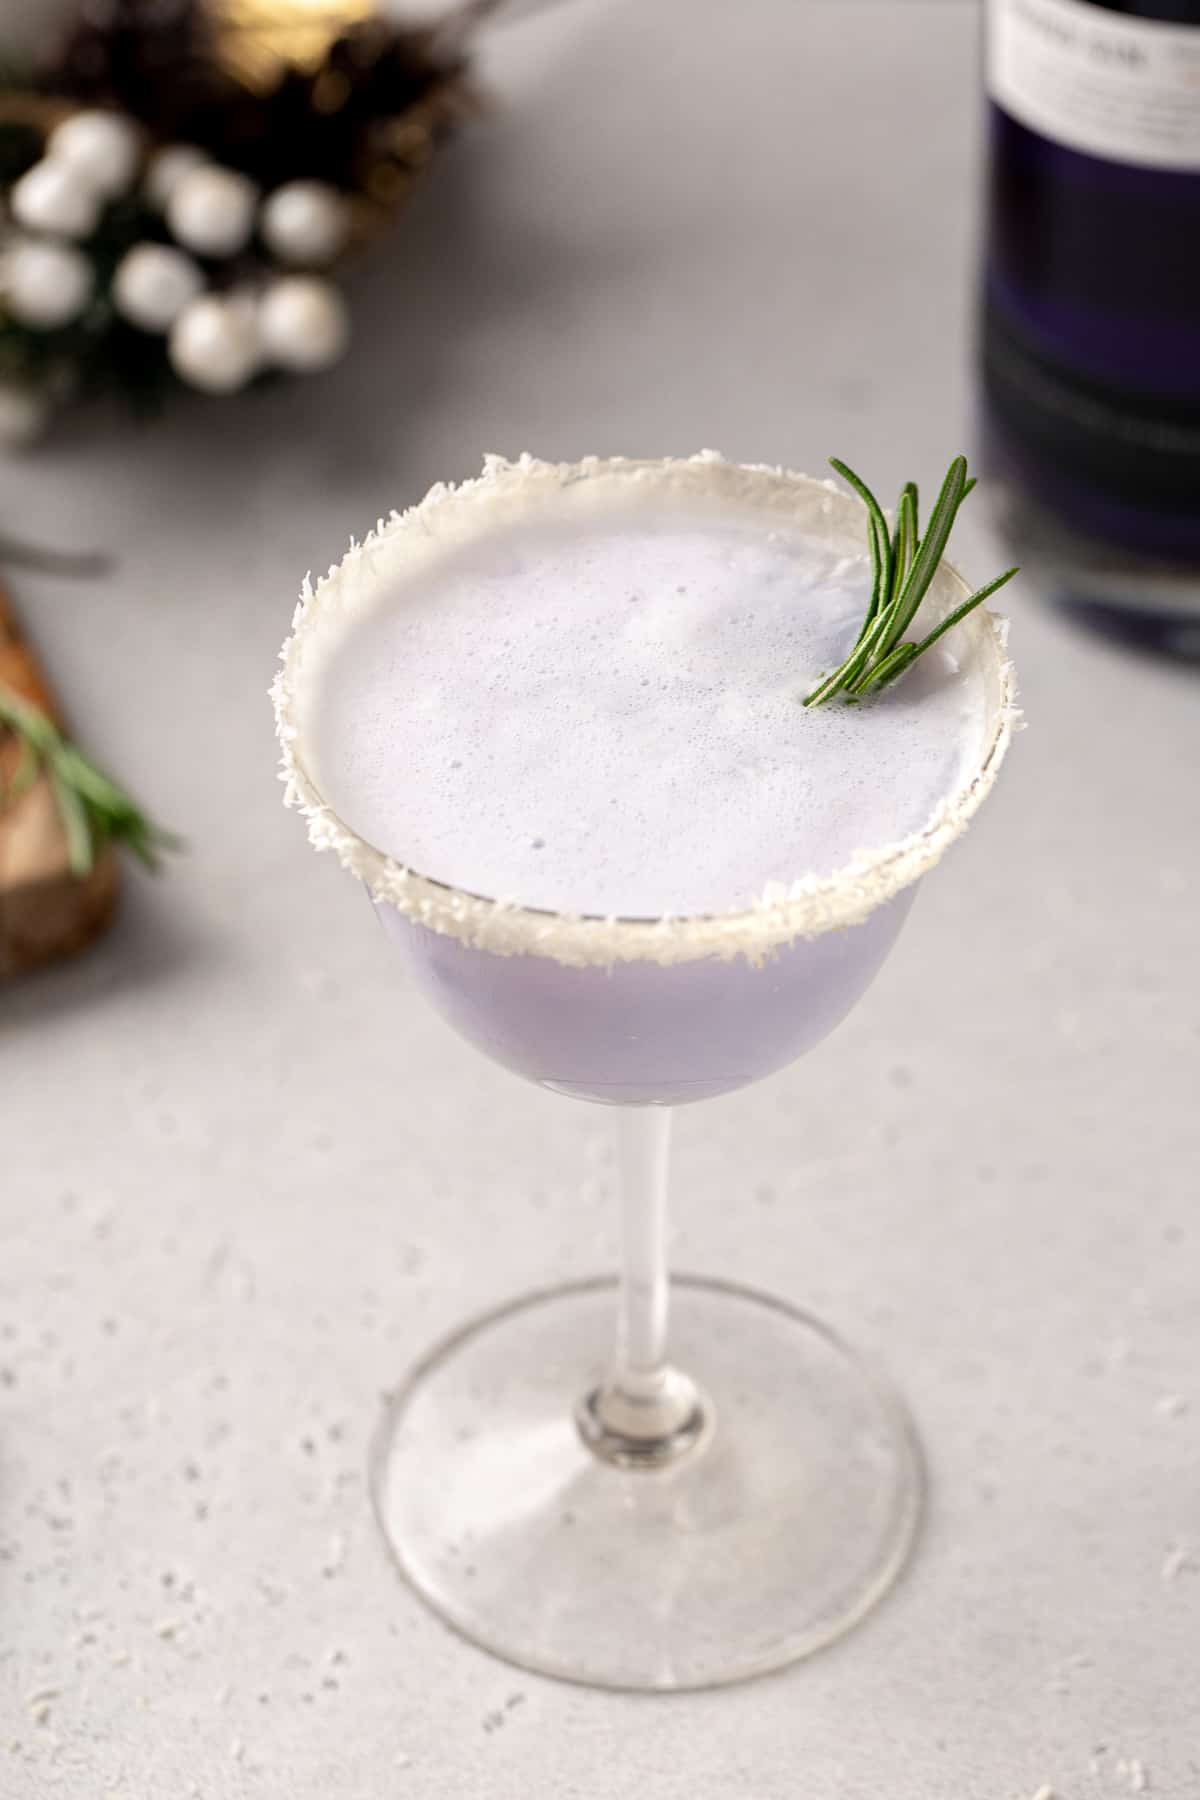 Overhead shot of the purple-colored Snowy Day cocktail, an Empress winter gin cocktail with coconut. A sprig of rosemary garnishes the drink.